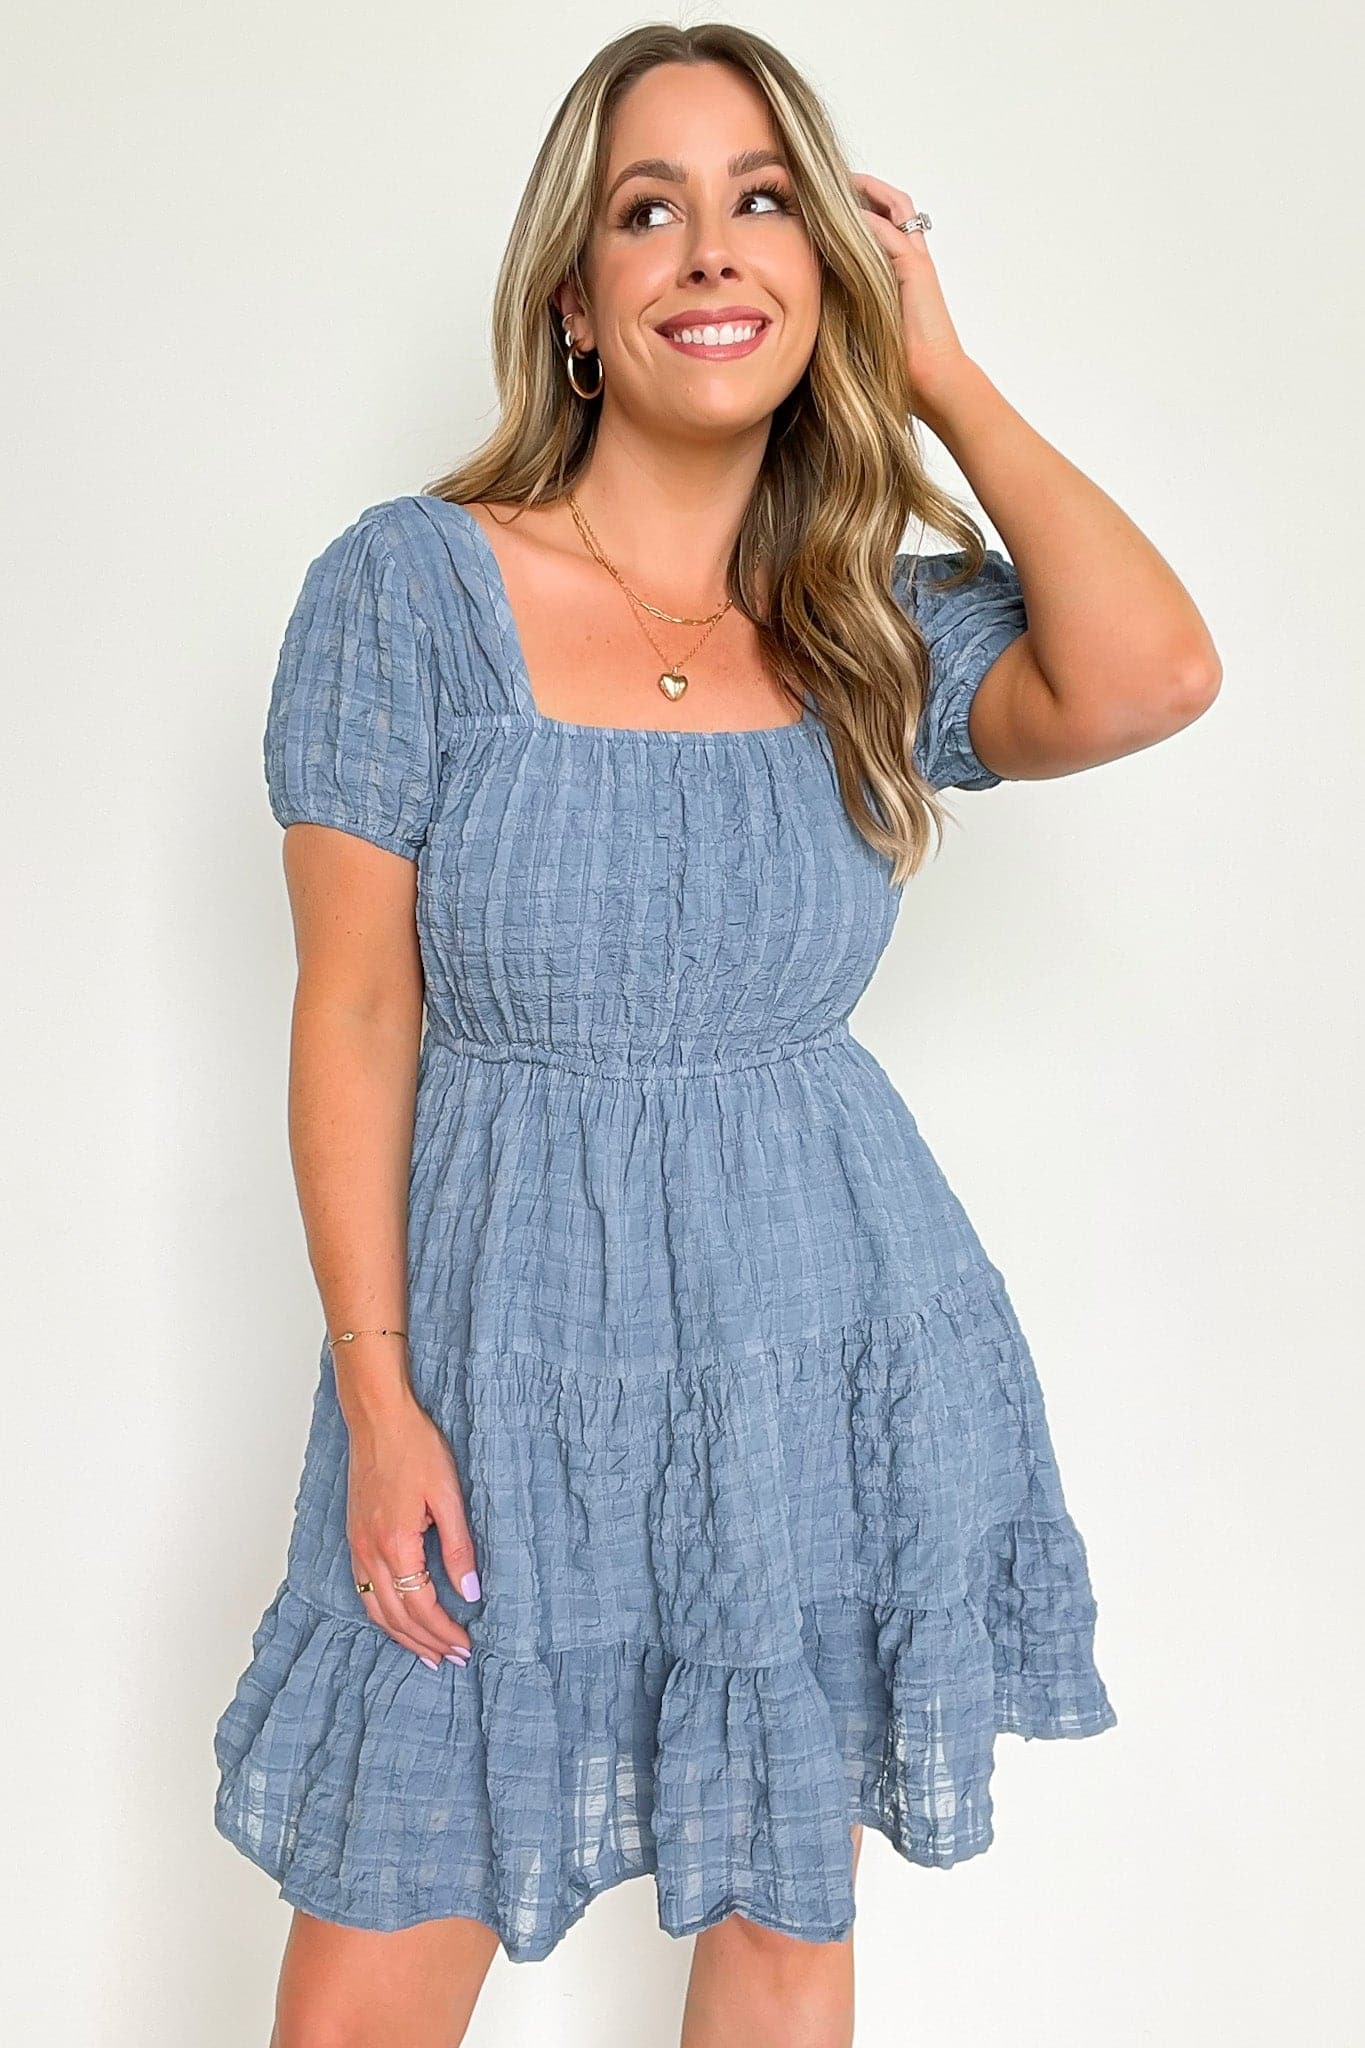  Elyssah Puff Sleeve Tiered Dress - FINAL SALE - Madison and Mallory